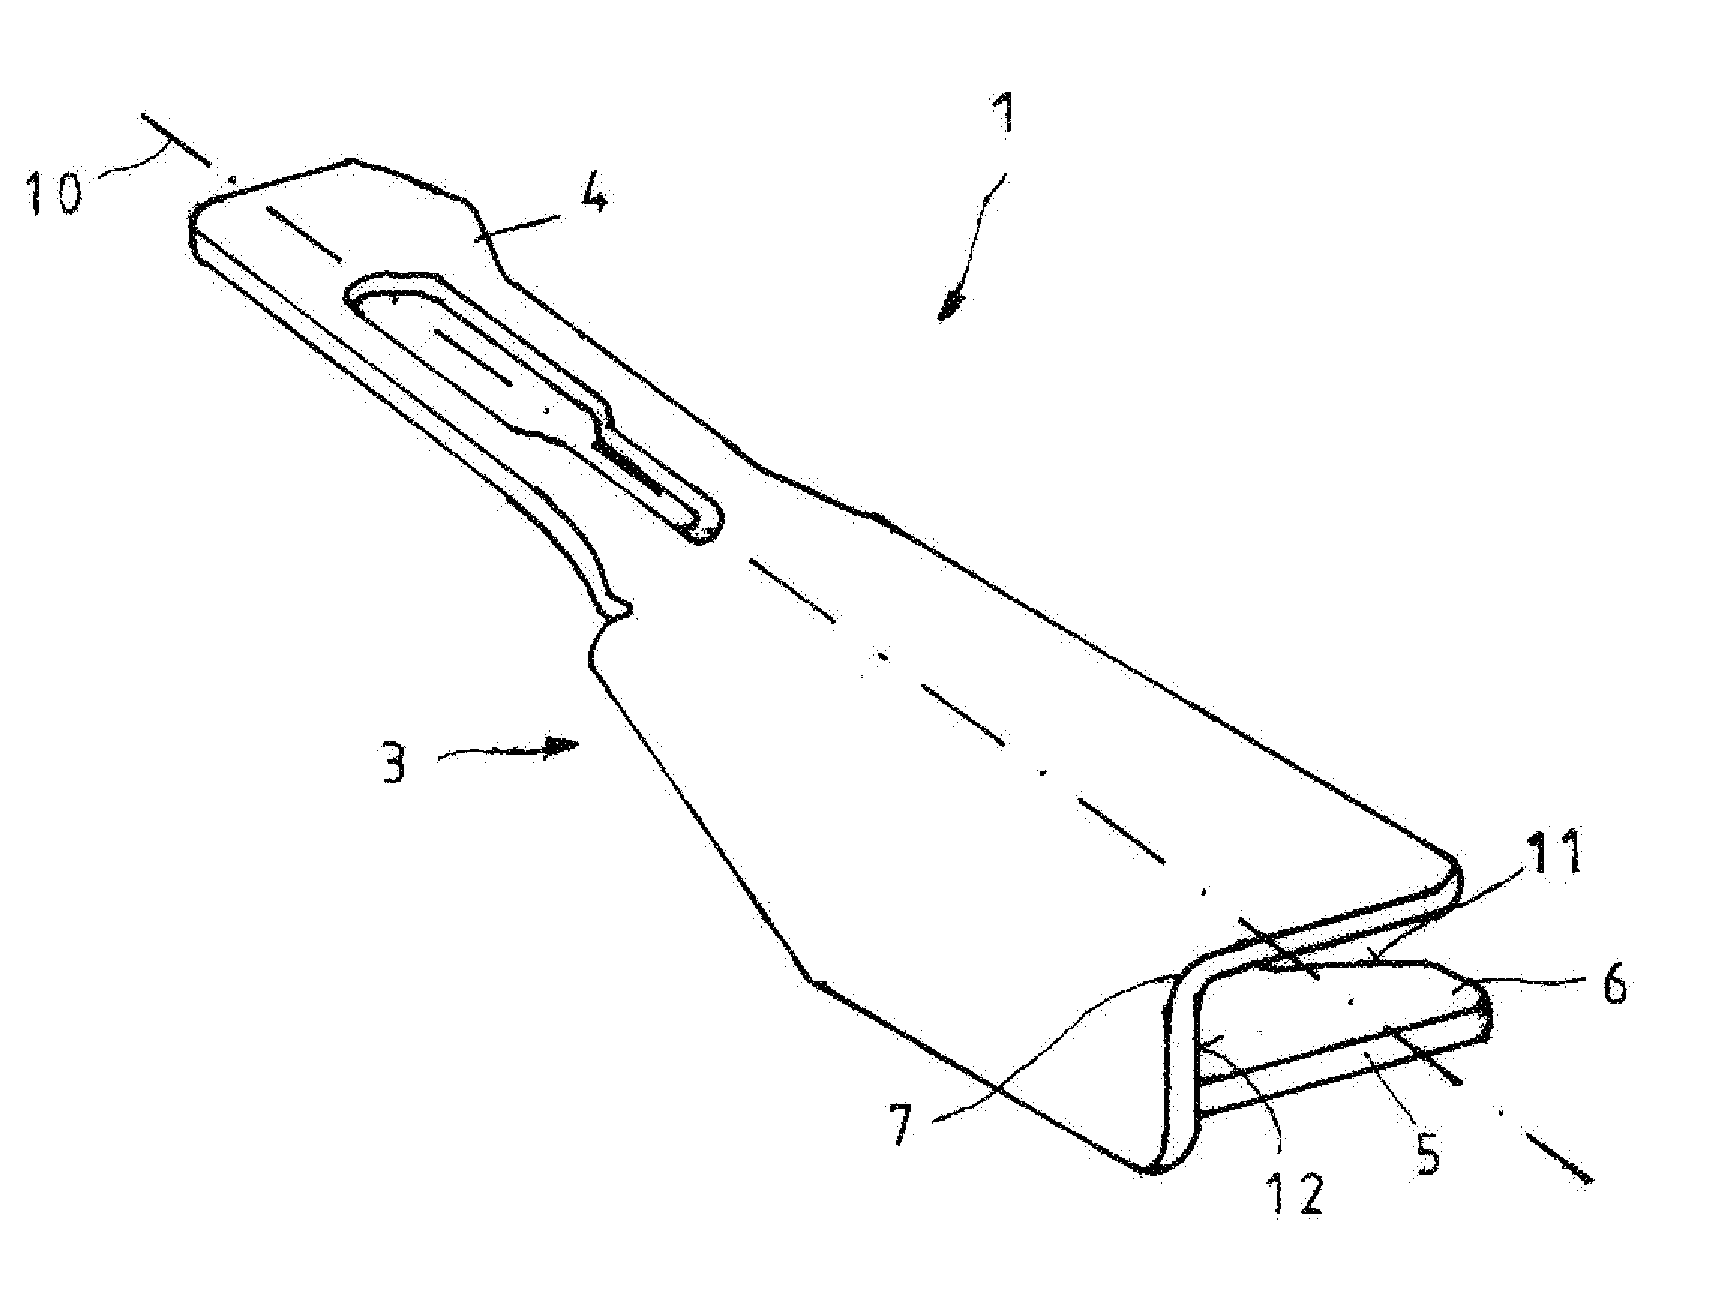 Medical cutting instrument for severing muscles and tendons